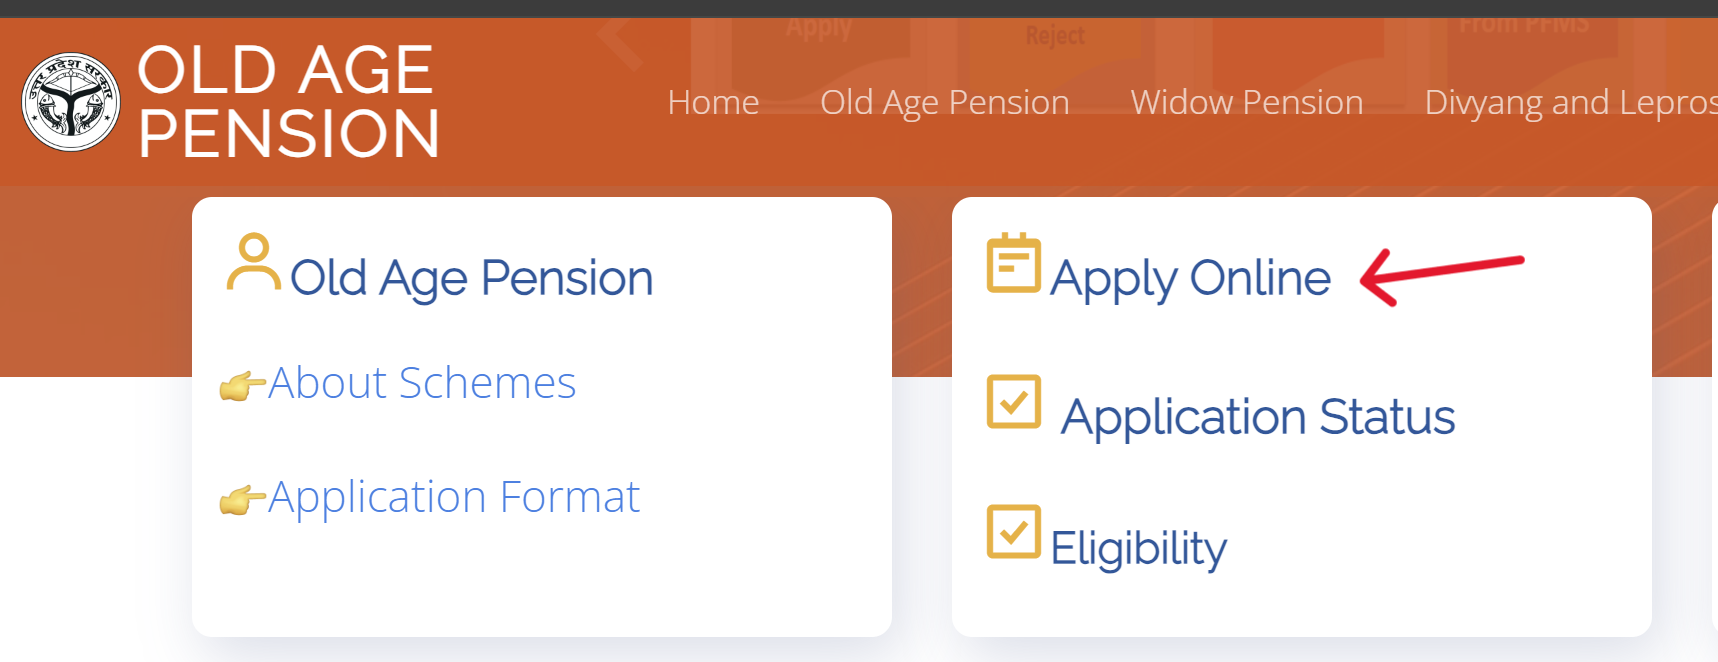 Apply Online Old Age Pension UP